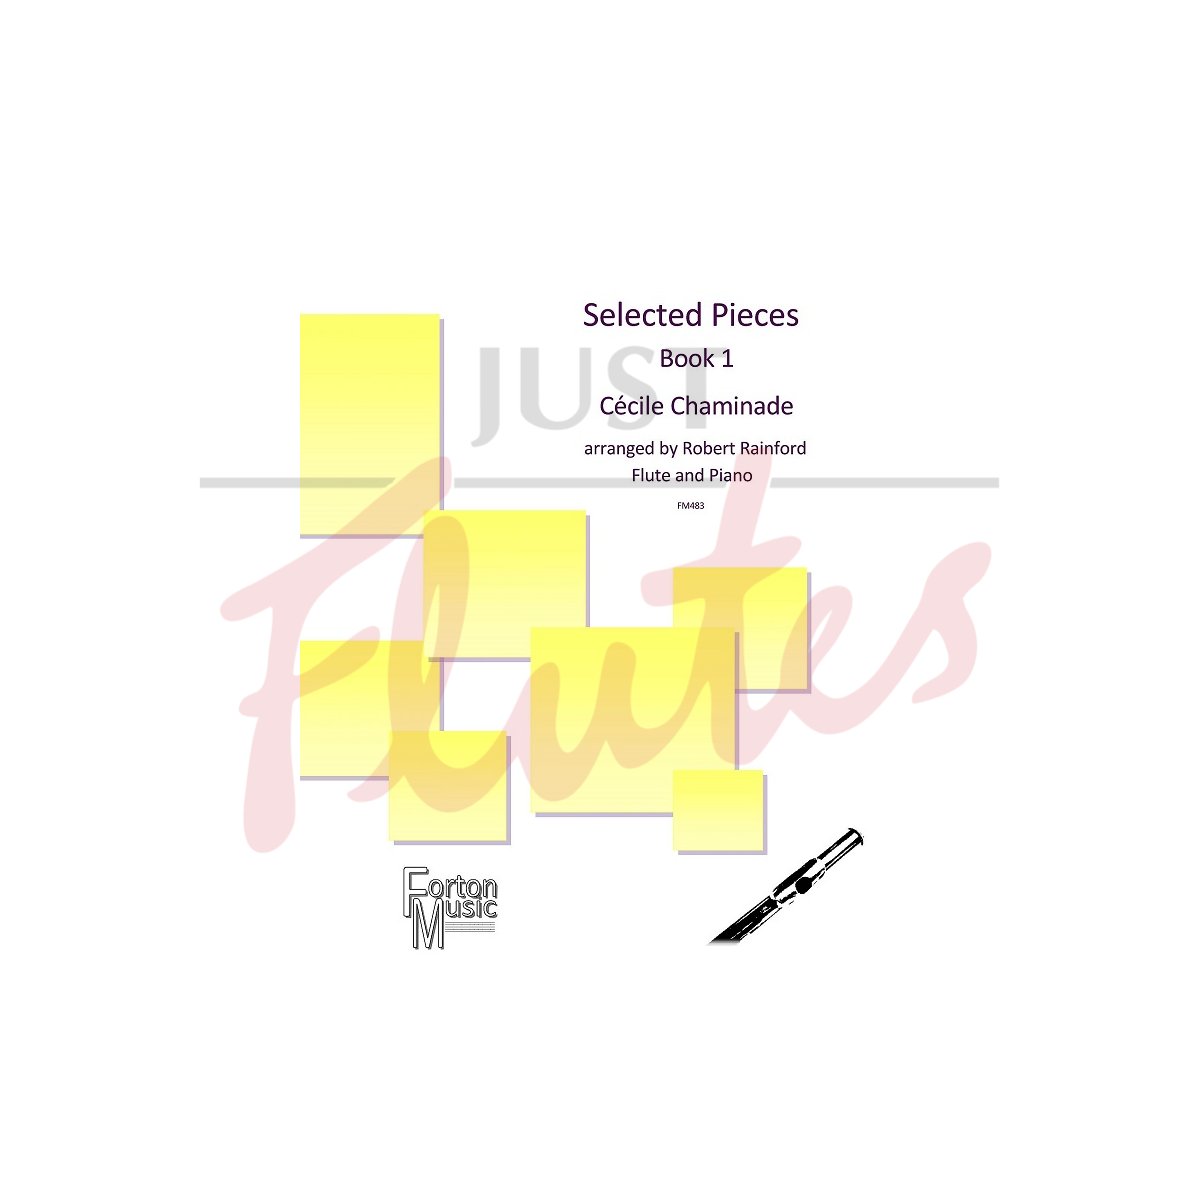 Selected Pieces arranged for Flute and Piano